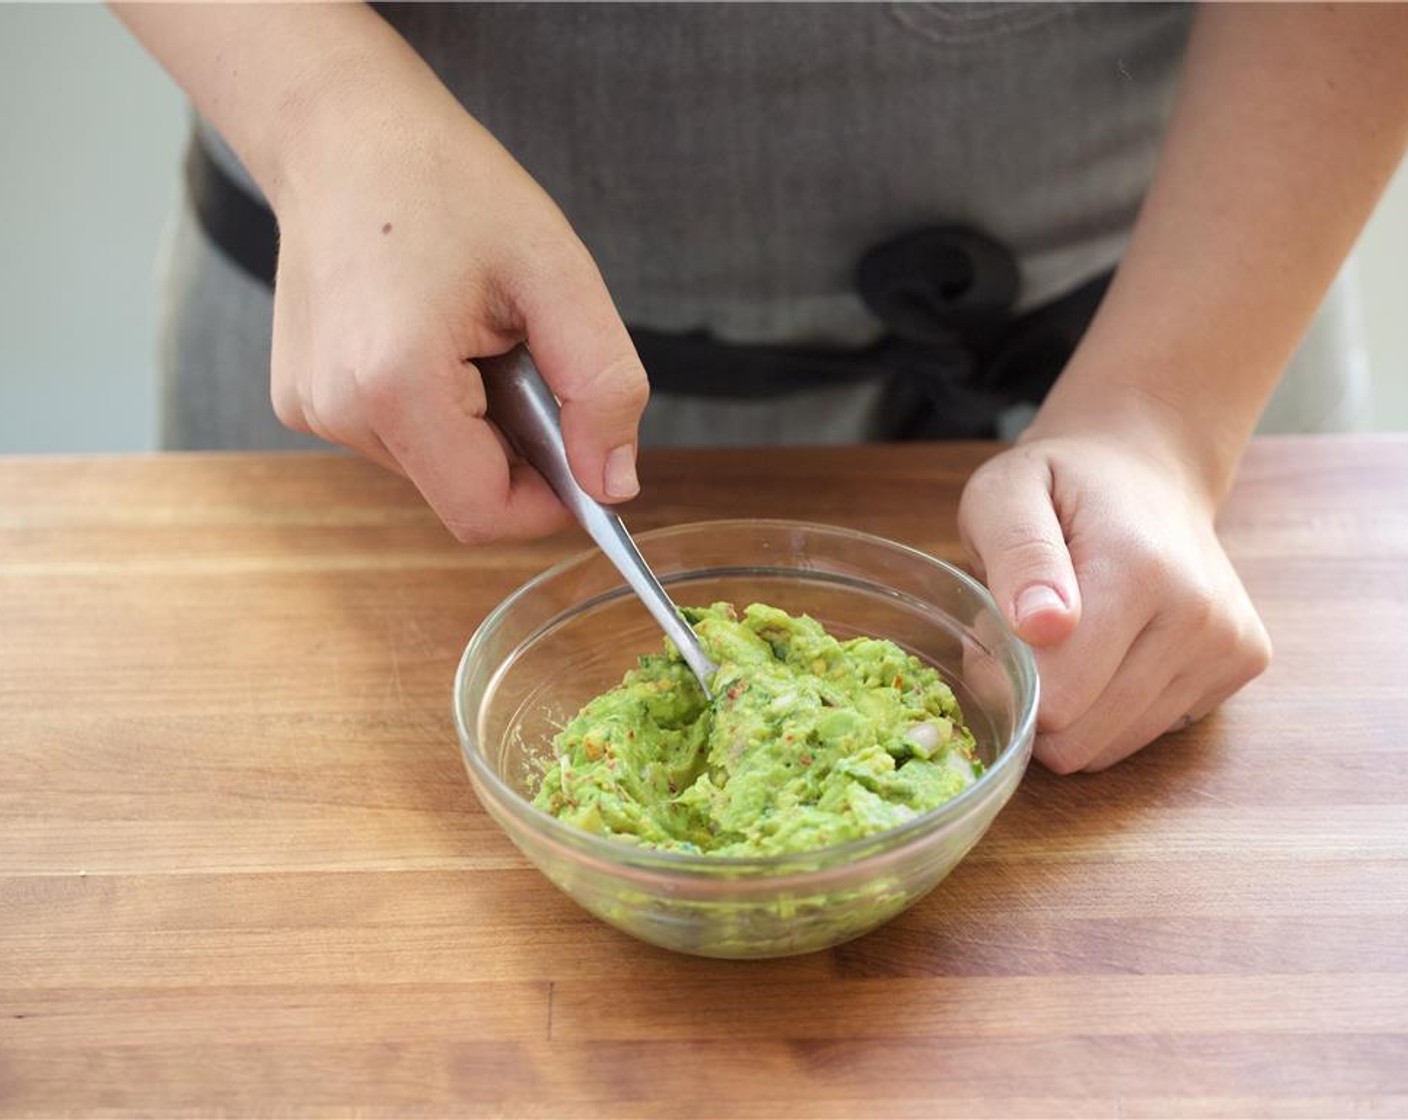 step 4 Cut Avocado (1) in half, remove the pit, and scrape out flesh into a small bowl. Add shallots, Crushed Red Pepper Flakes (1 tsp), 2 teaspoons of lime juice, Salt (1/4 tsp) and Ground Black Pepper (1/4 tsp) and half of the cilantro. Use a fork to mix well.